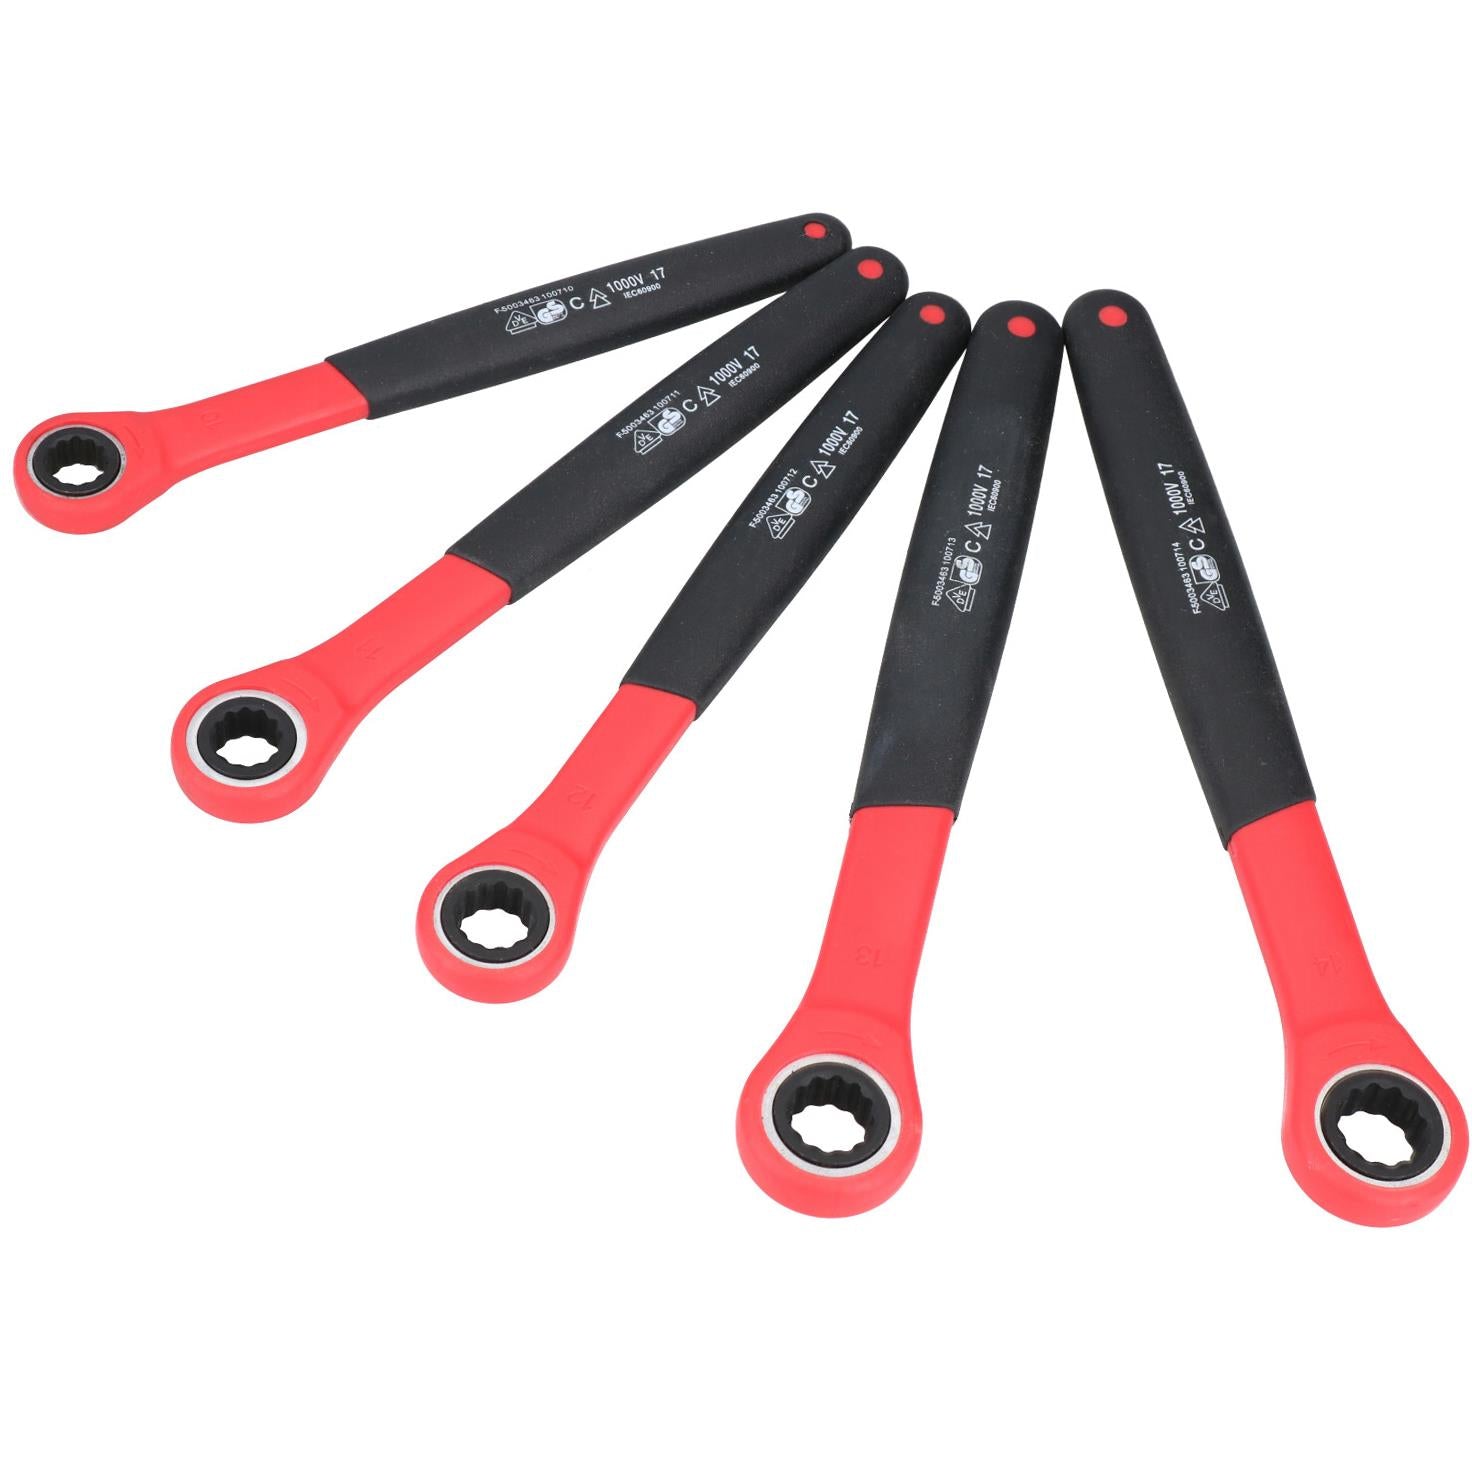 Metric VDE Insulated Ratchet Ring Spanner Wrench Hybrid Electrical 10 – 14mm